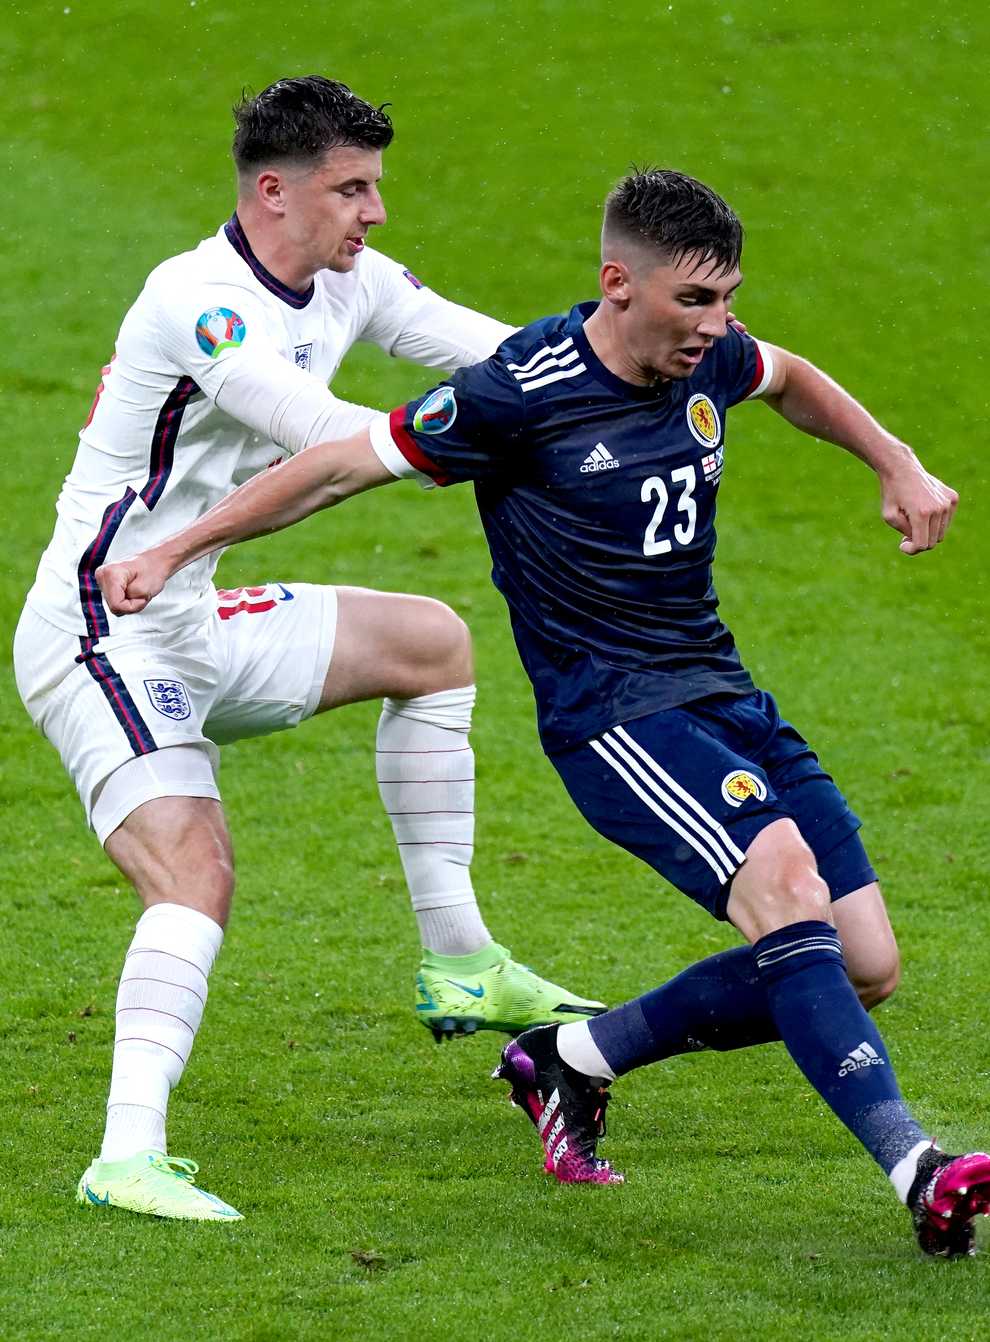 Chelsea team-mates Mason Mount (left) and Billy Gilmour were on opposing sides as England and Scotland drew at Euro 2020.